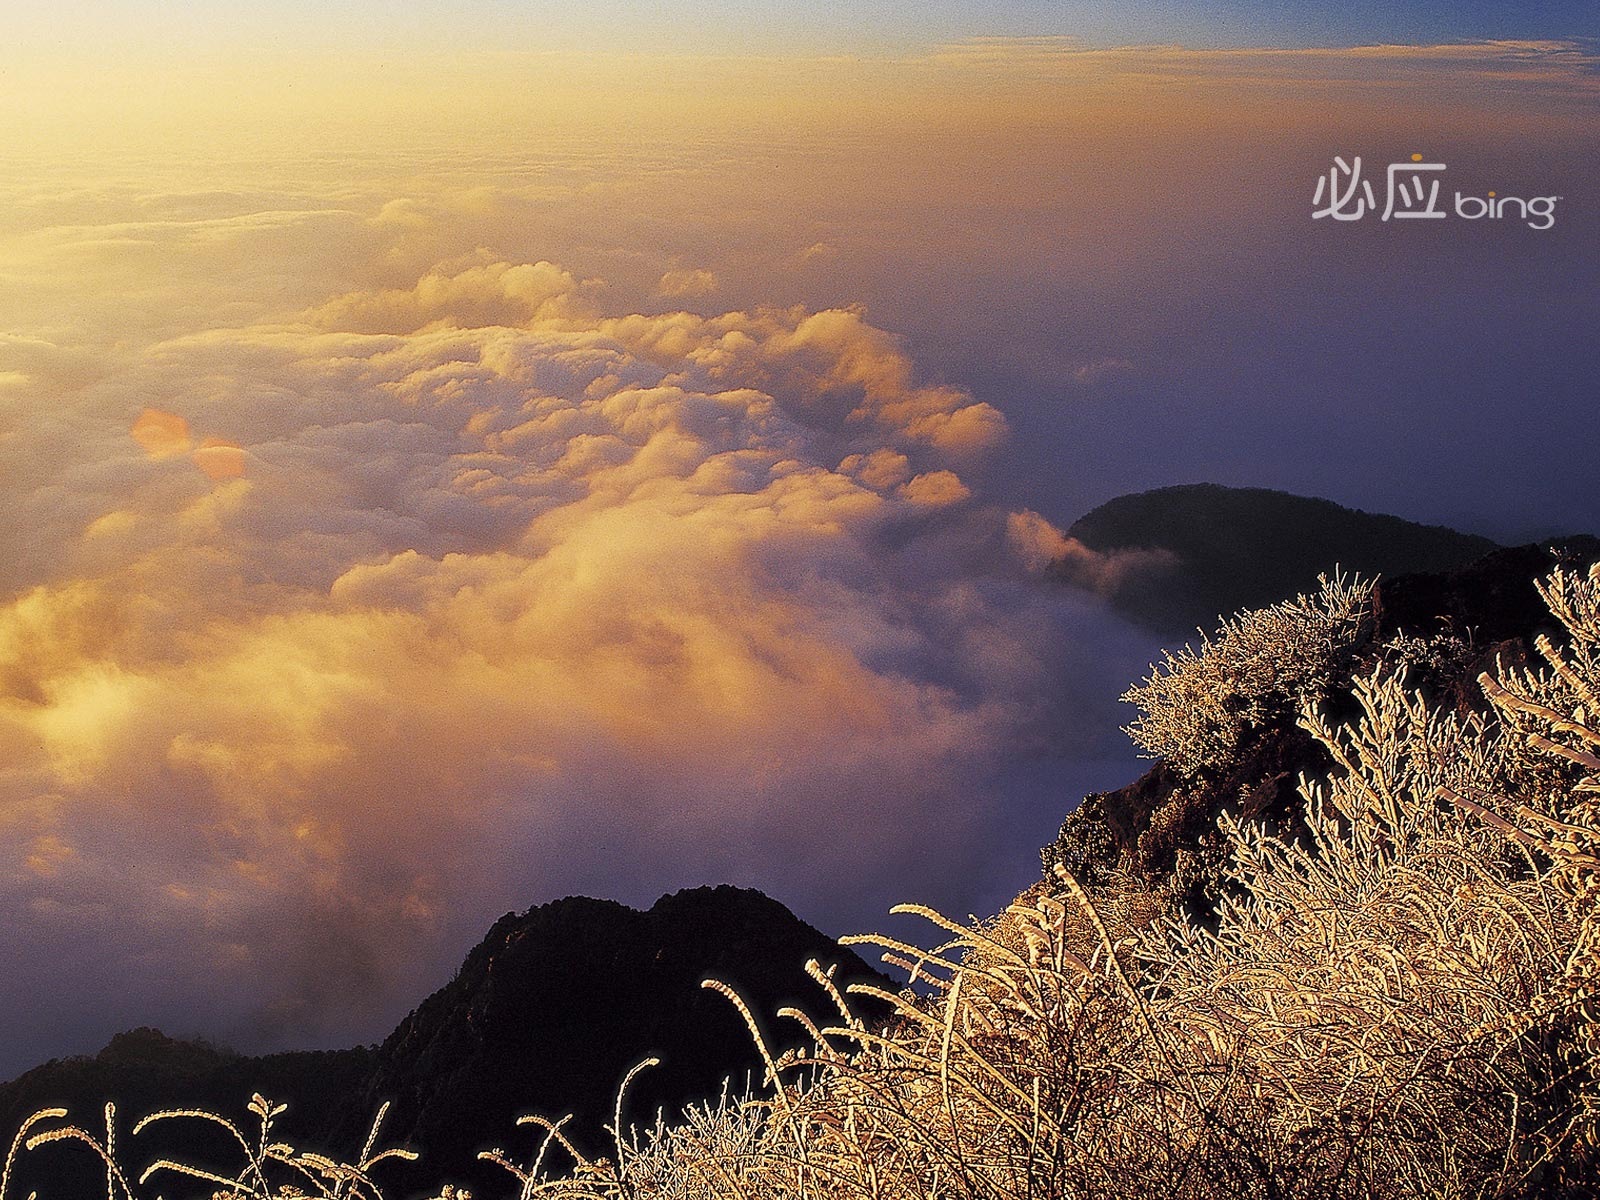 Bing selection best HD wallpapers: China theme wallpaper (2) #14 - 1600x1200